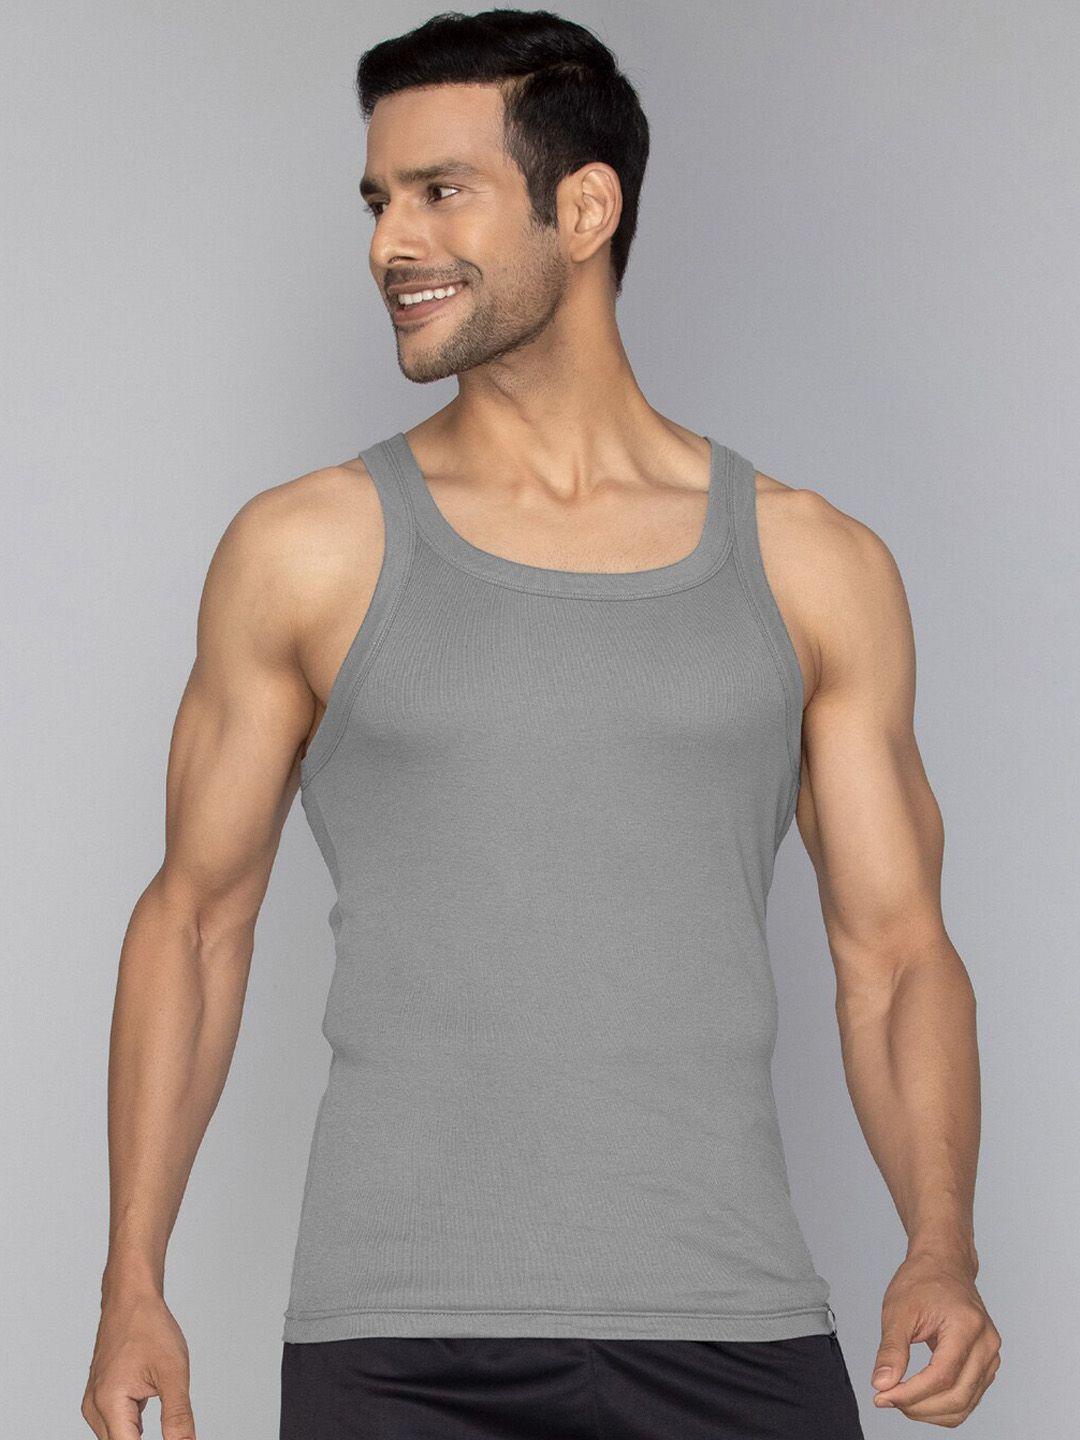 XYXX Anti-Bacterial Super Combed Cotton Innerwear Gym Vest